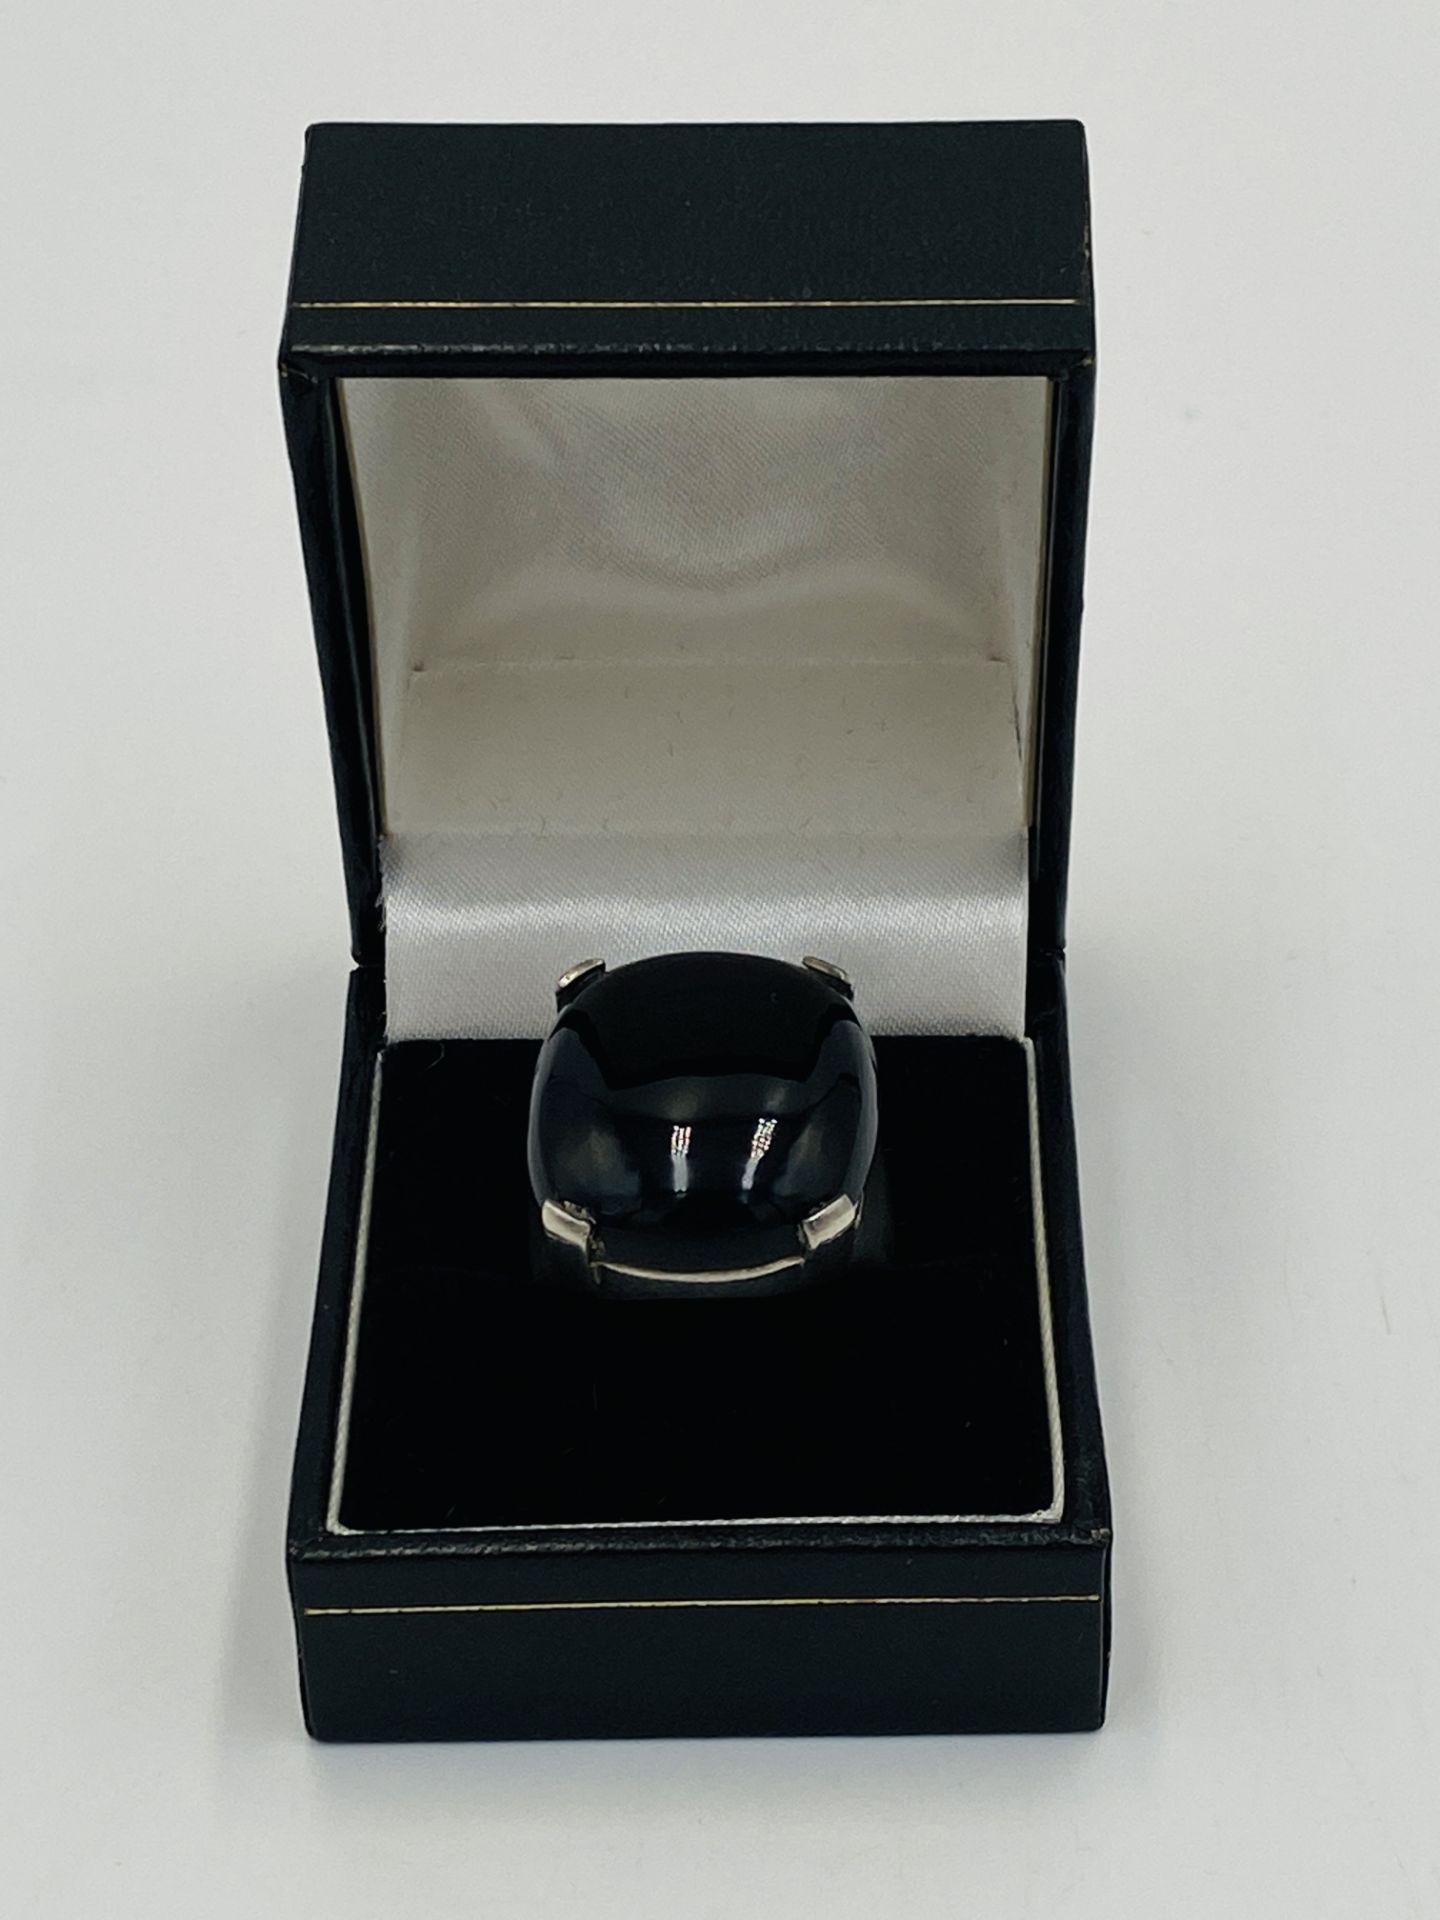 Silver ring set with an onyx stone - Image 2 of 5